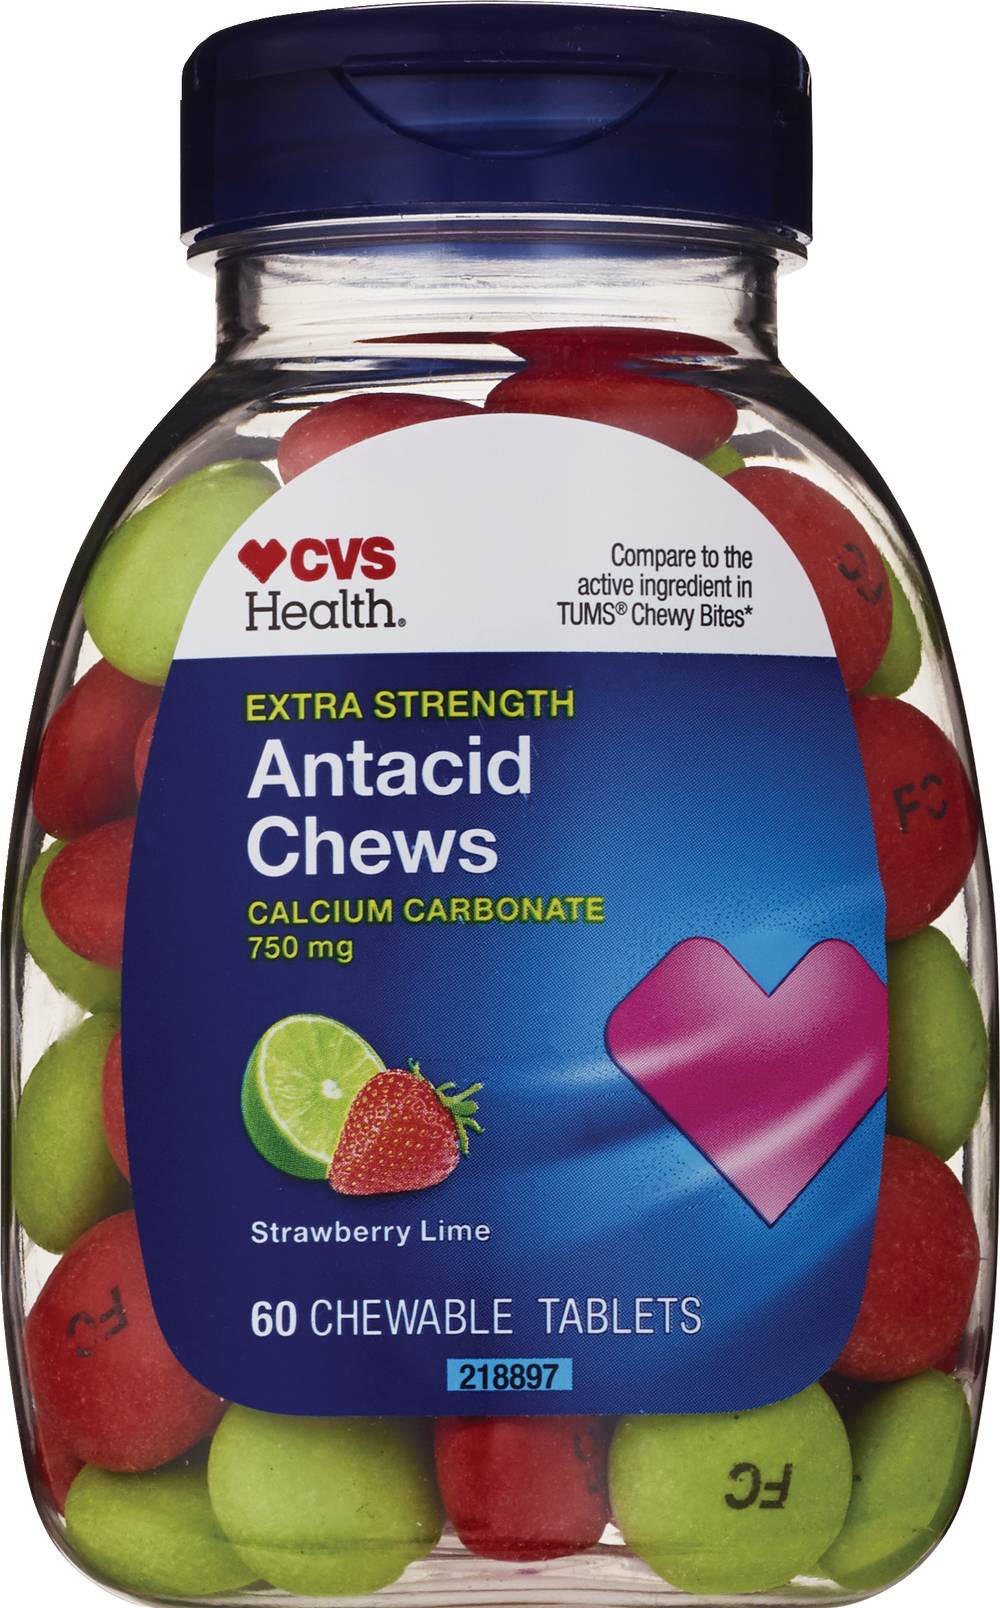 CVS Health Extra Strength Antacid Chewable Tablets, Strawberry Lime, 60 CT